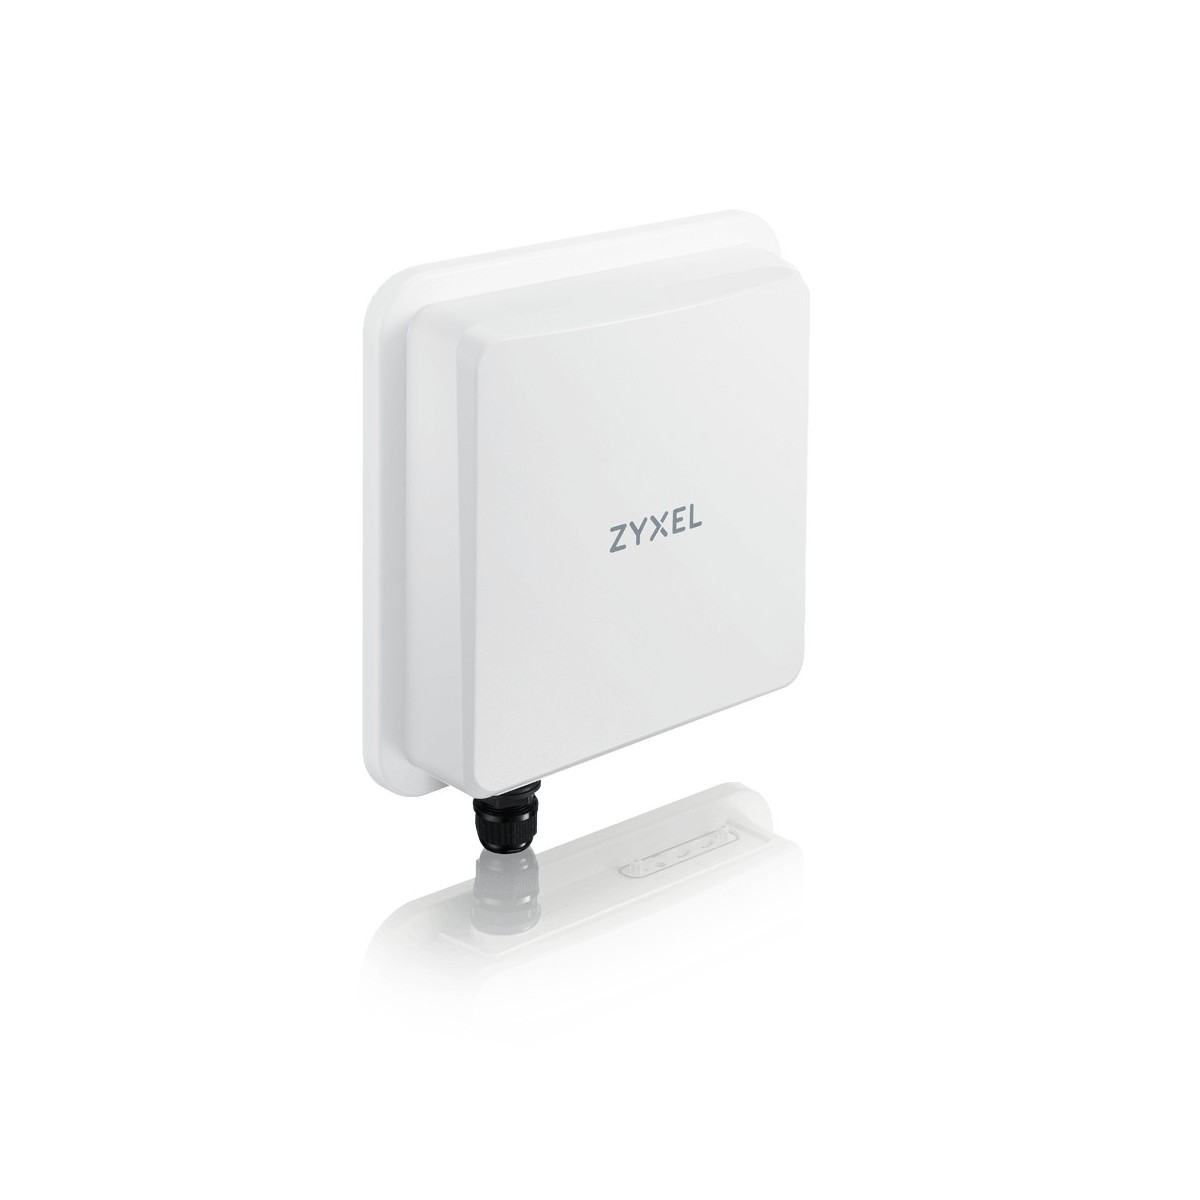 ZyXEL NR7101 - Cellular network router - White - Wall mounting - Gigabit Ethernet - IEEE 802.3af,IEEE 802.3at - 802.11b,802.11g,